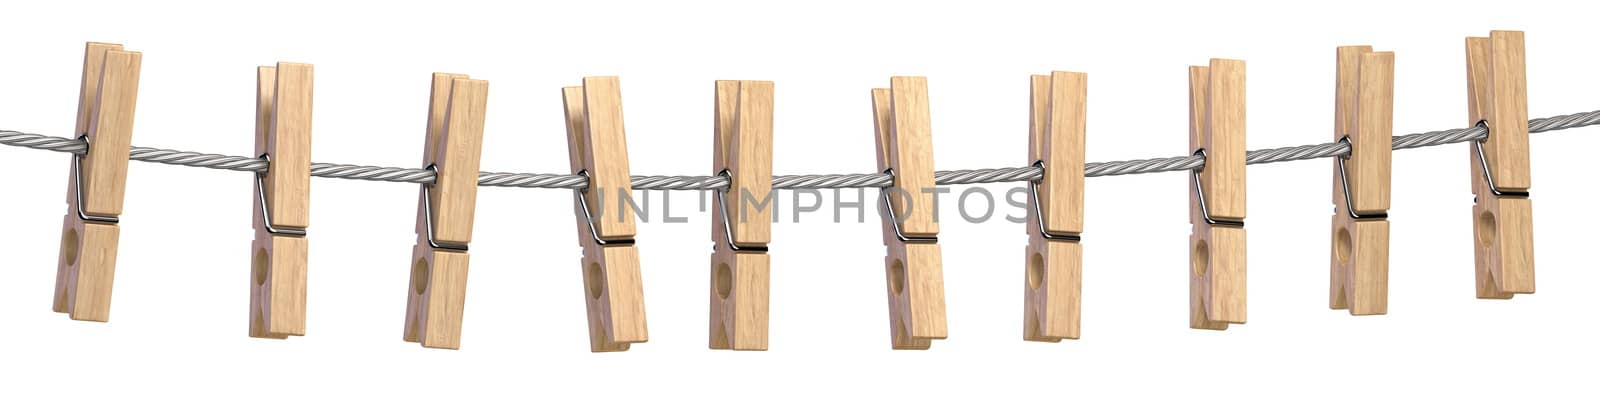 Wooden clothes pin on rope 3D render illustration isolated on white background